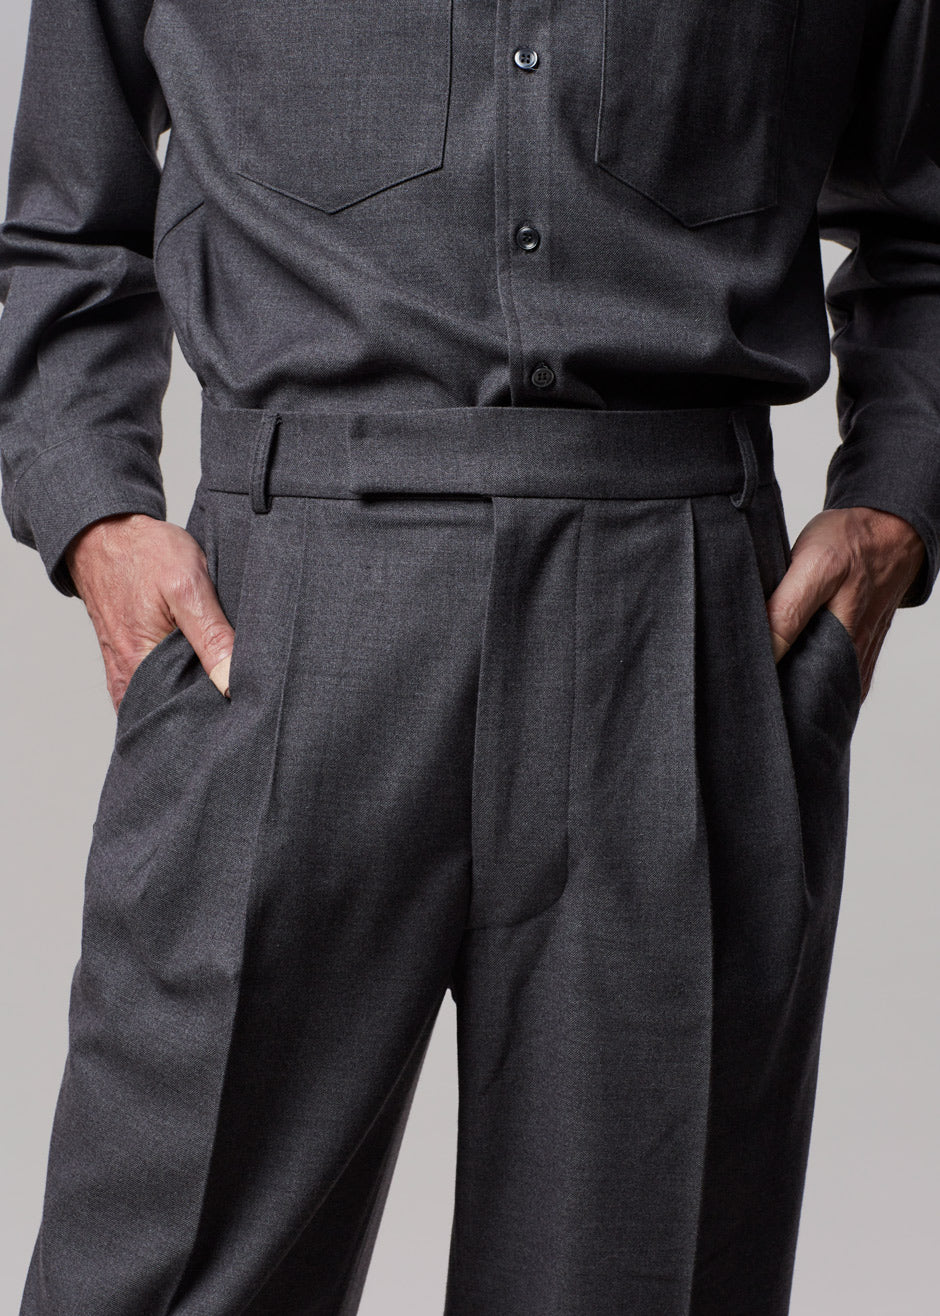 Heith Flanelle Suit Pants - Charcoal - 3